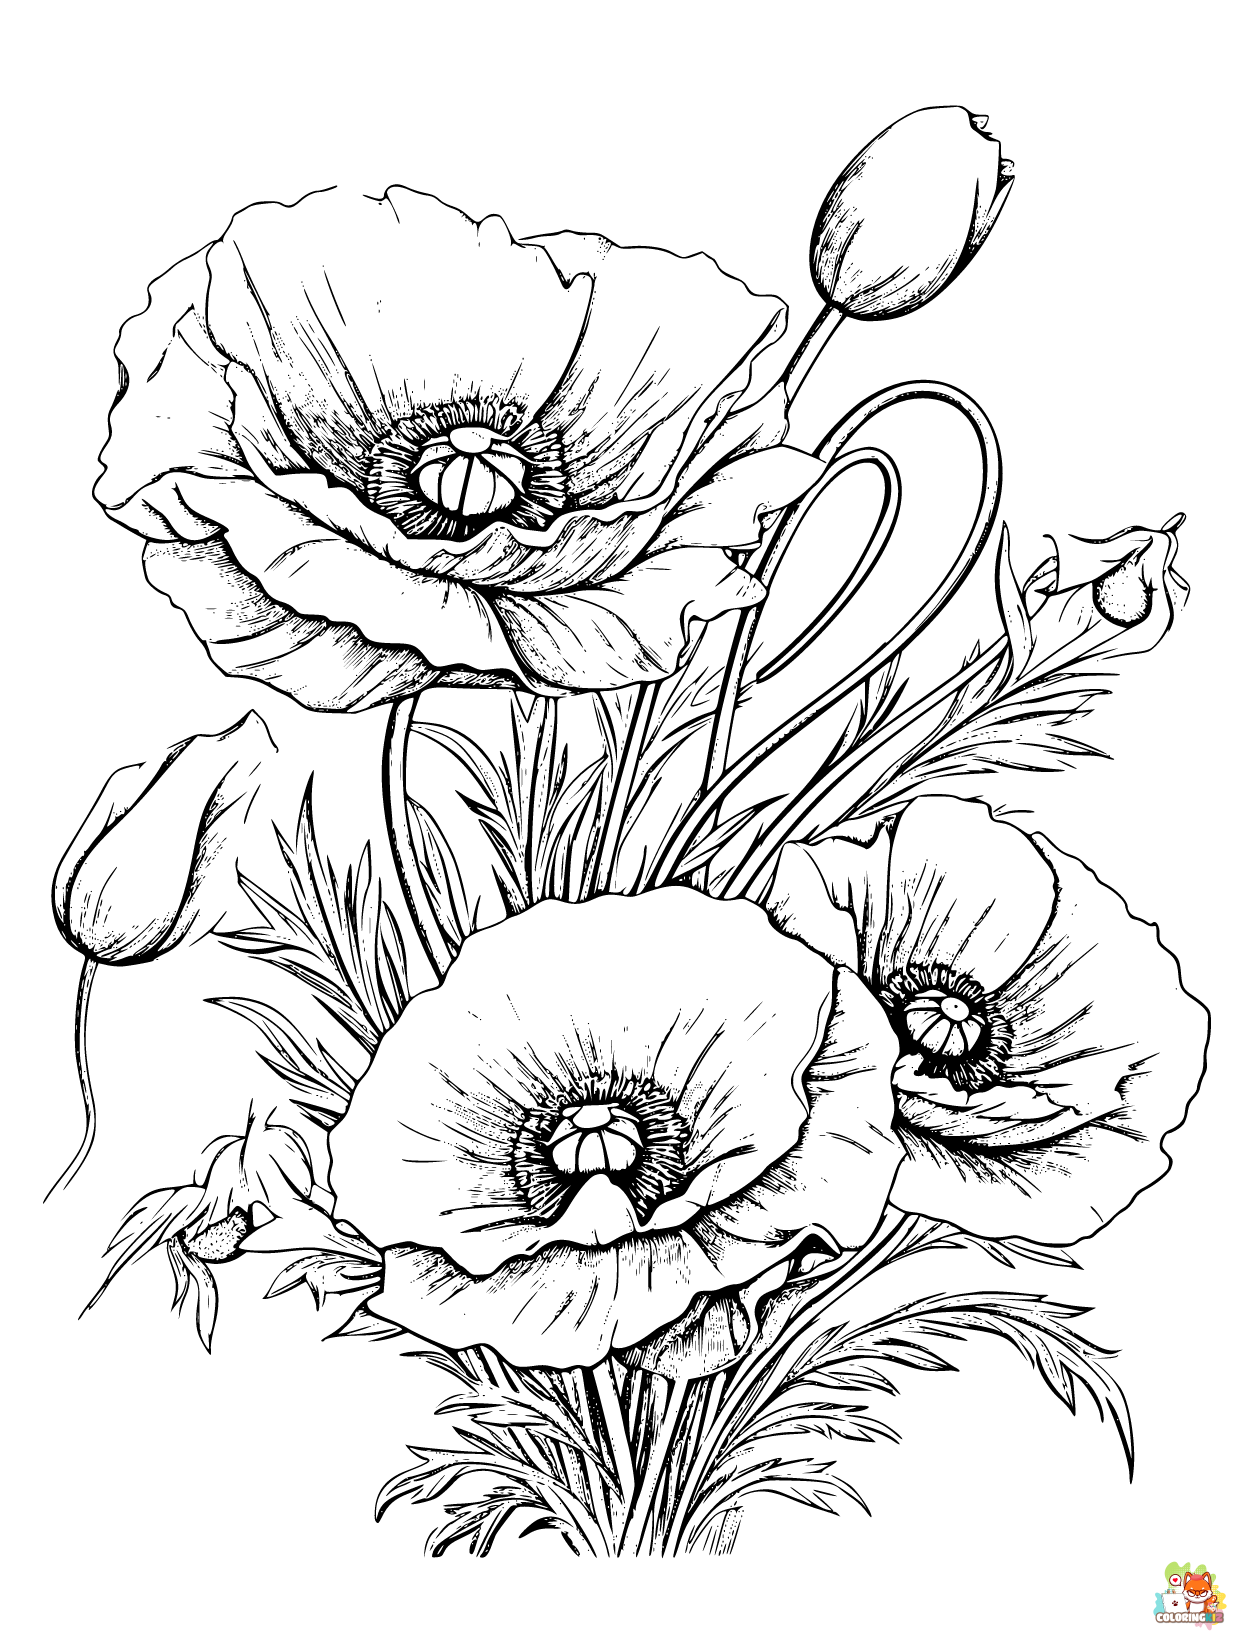 gbcoloring poppies Coloring pages for adult poppies style of co 73295ba0 caa6 44f7 a06e 0019a8f6a0e9 edge